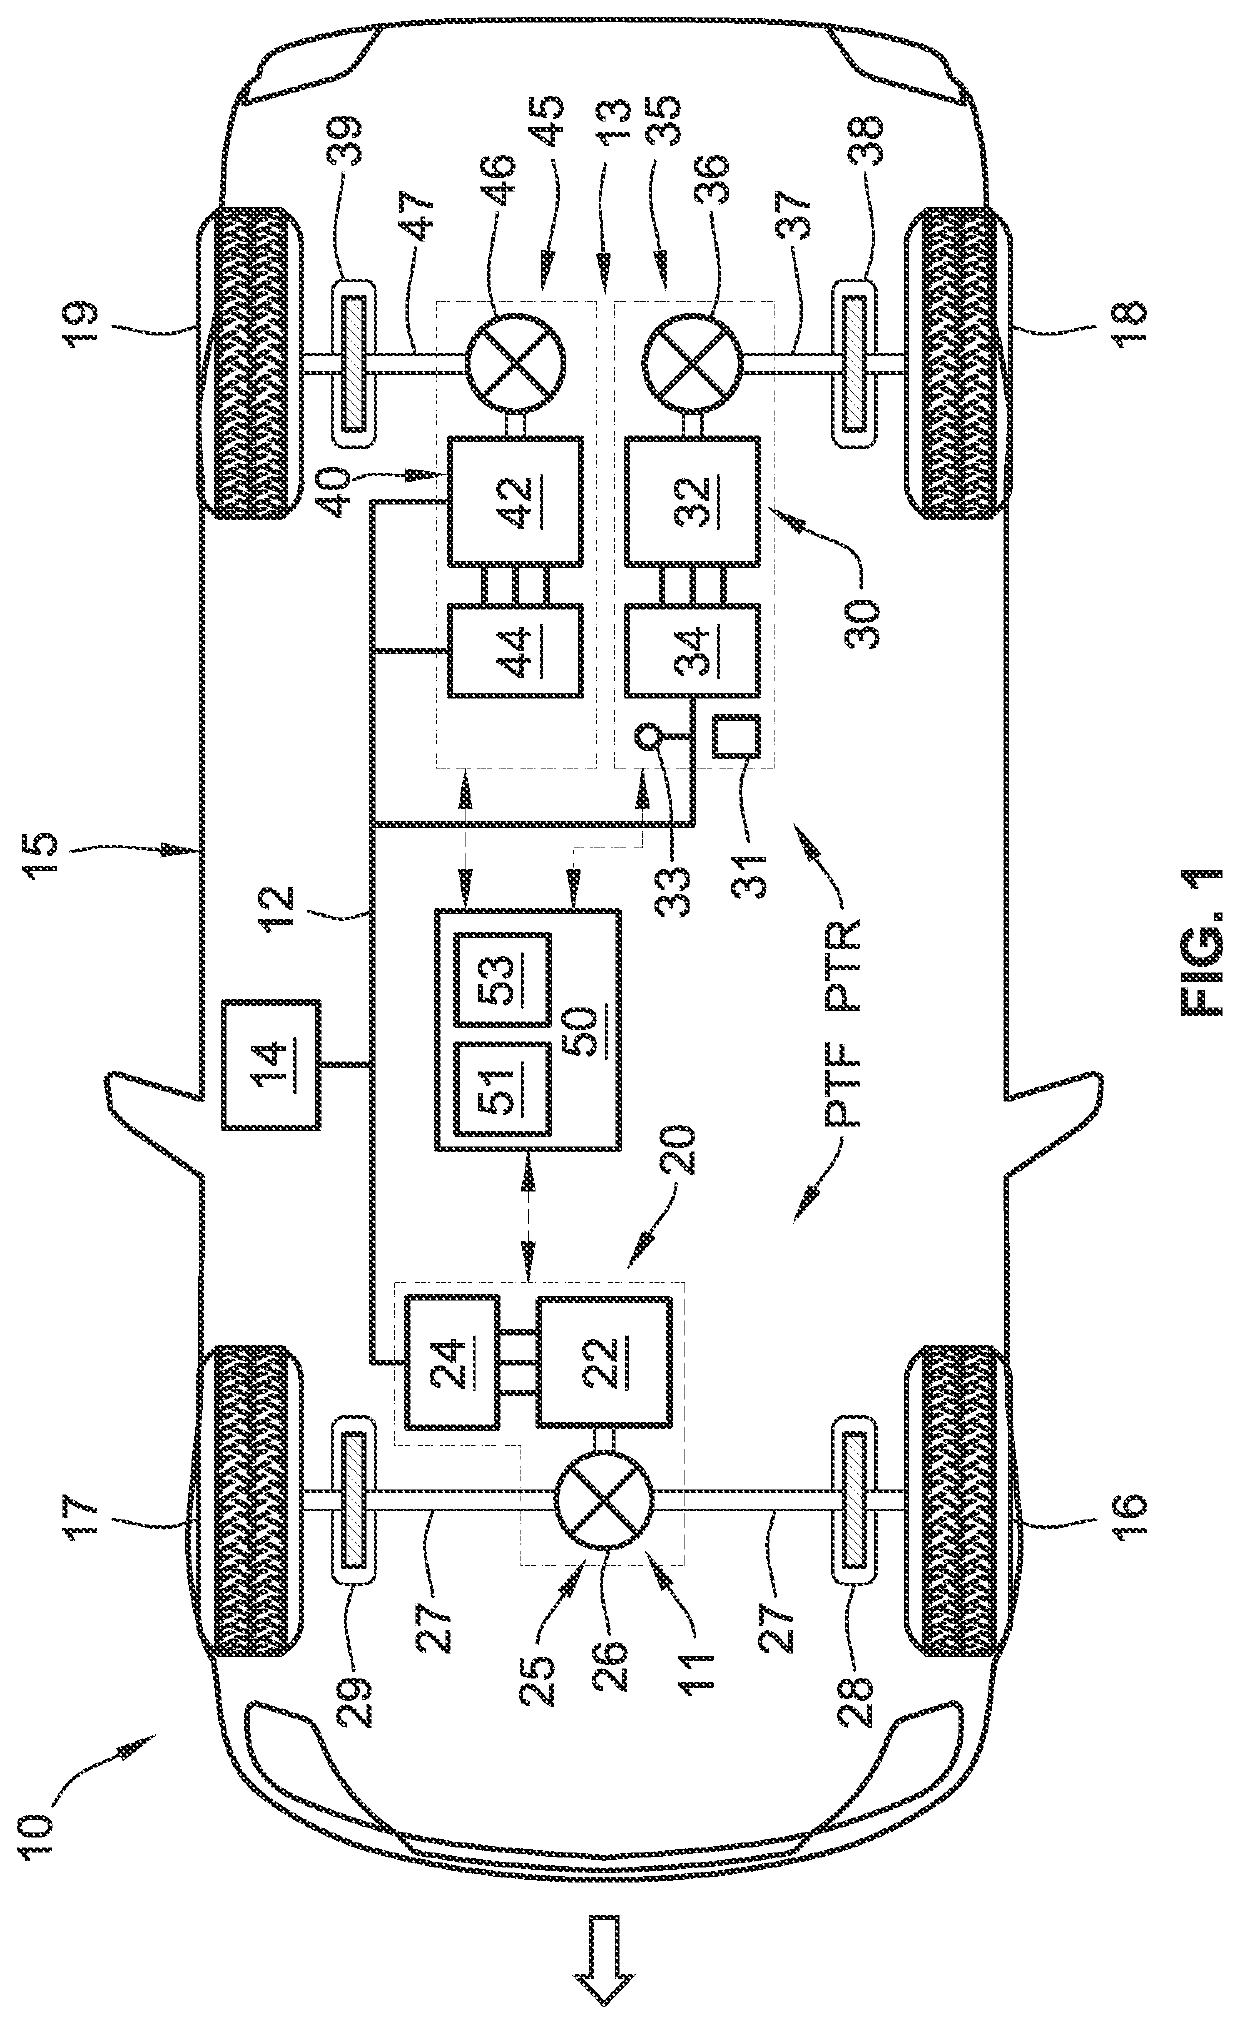 Intelligent vehicles and control logic for managing faults for dual-independent drive unit axle powertrains